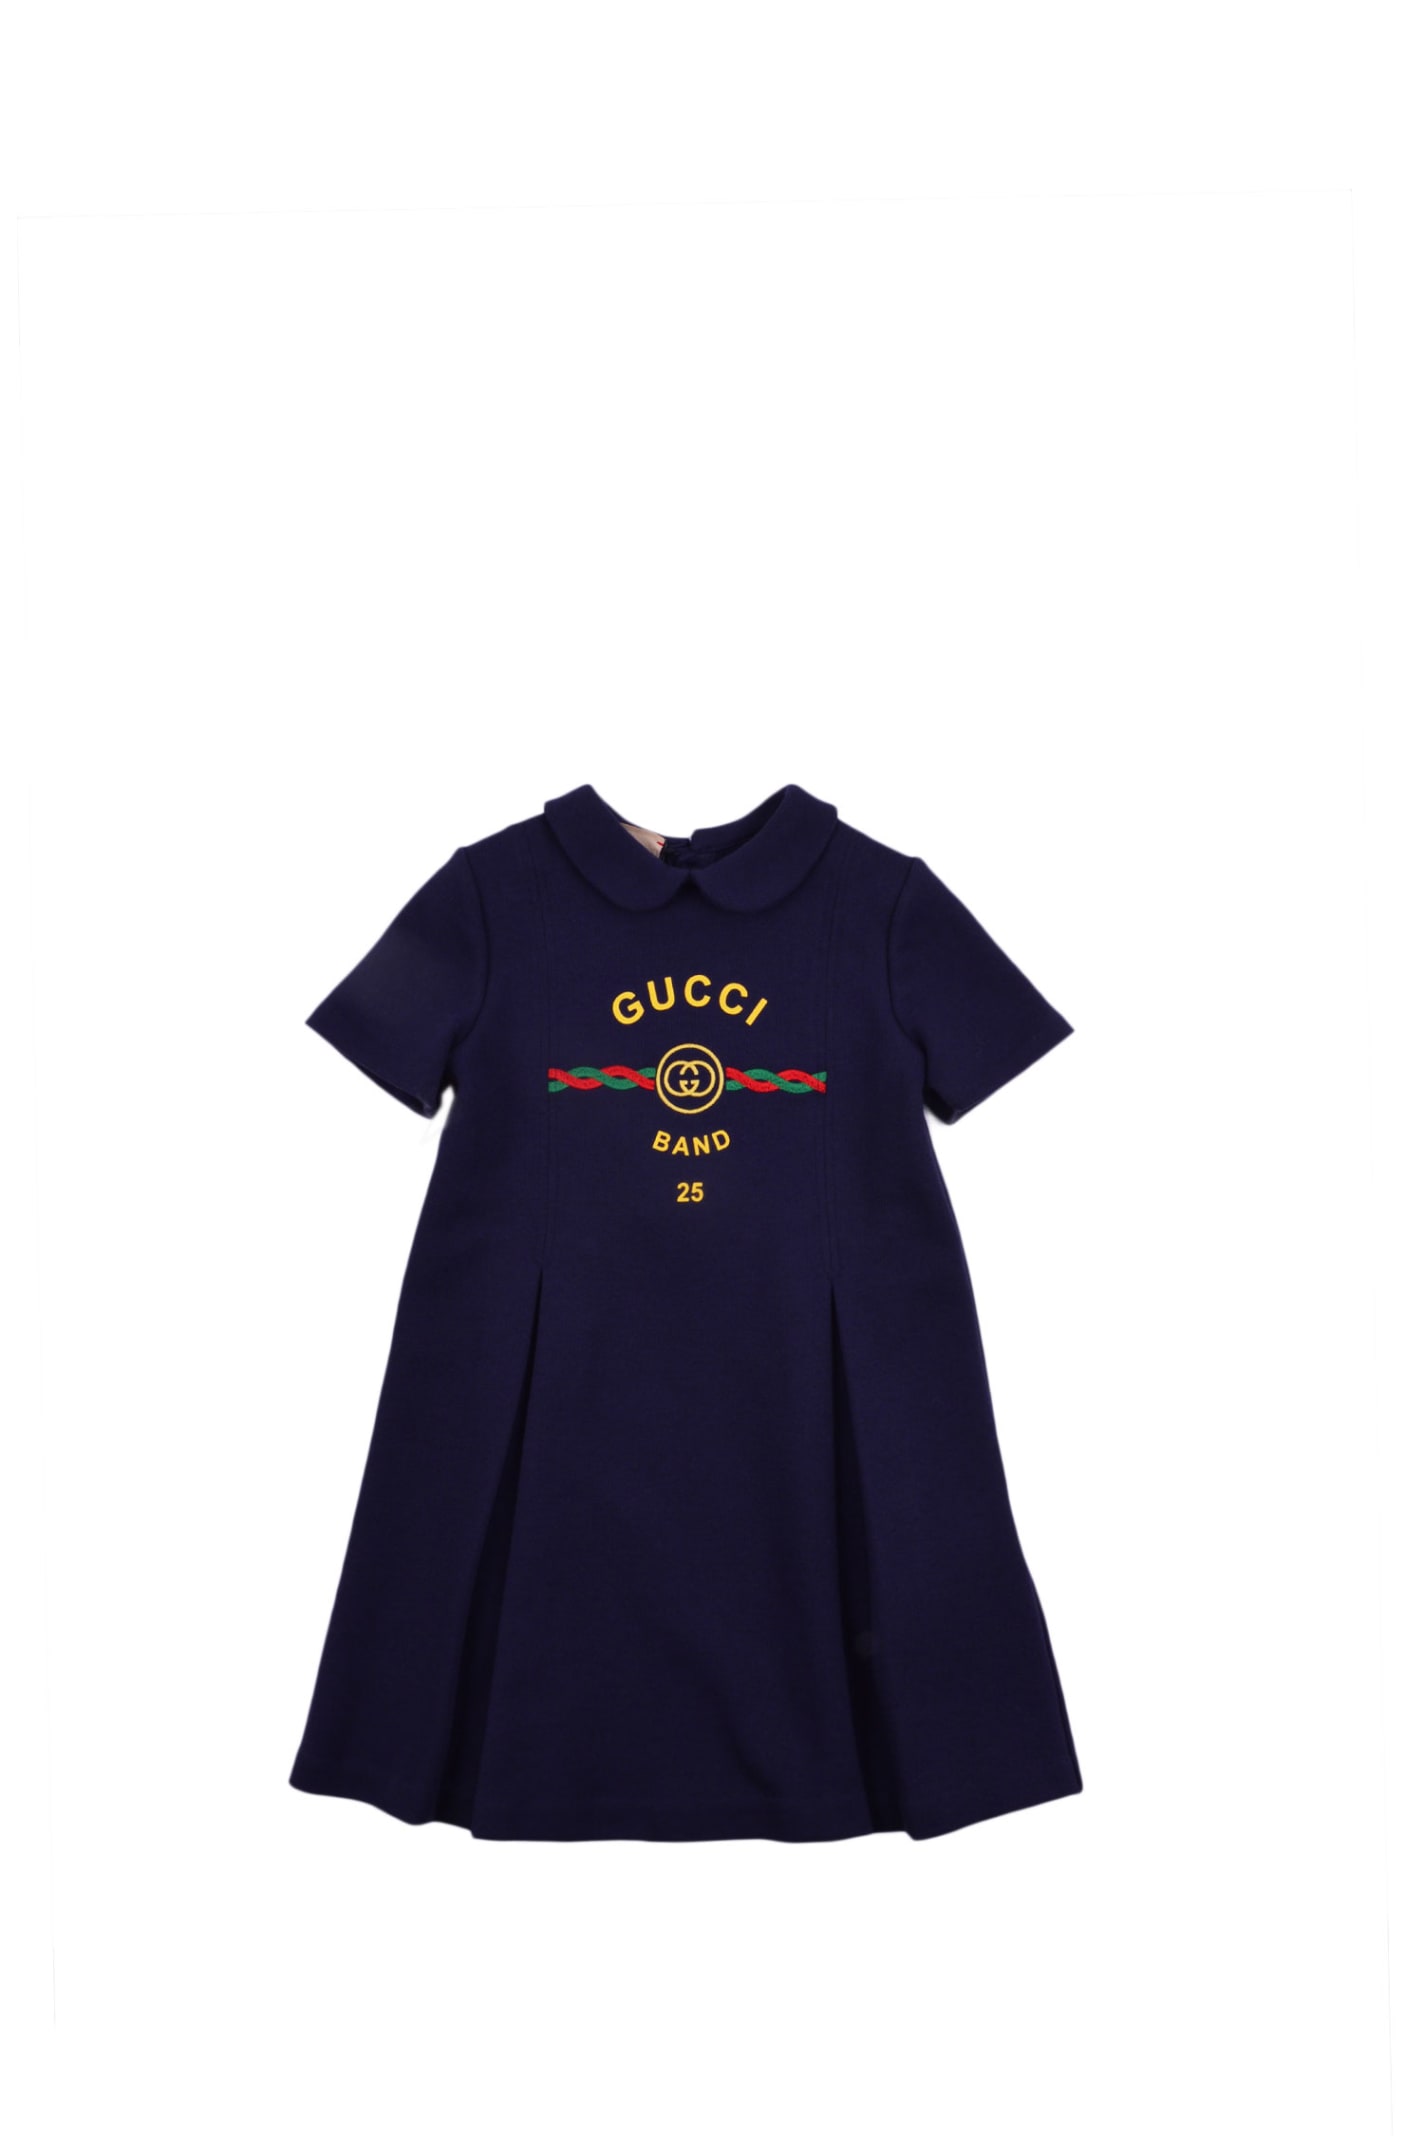 Gucci Printed Dress In Fleece Cotton